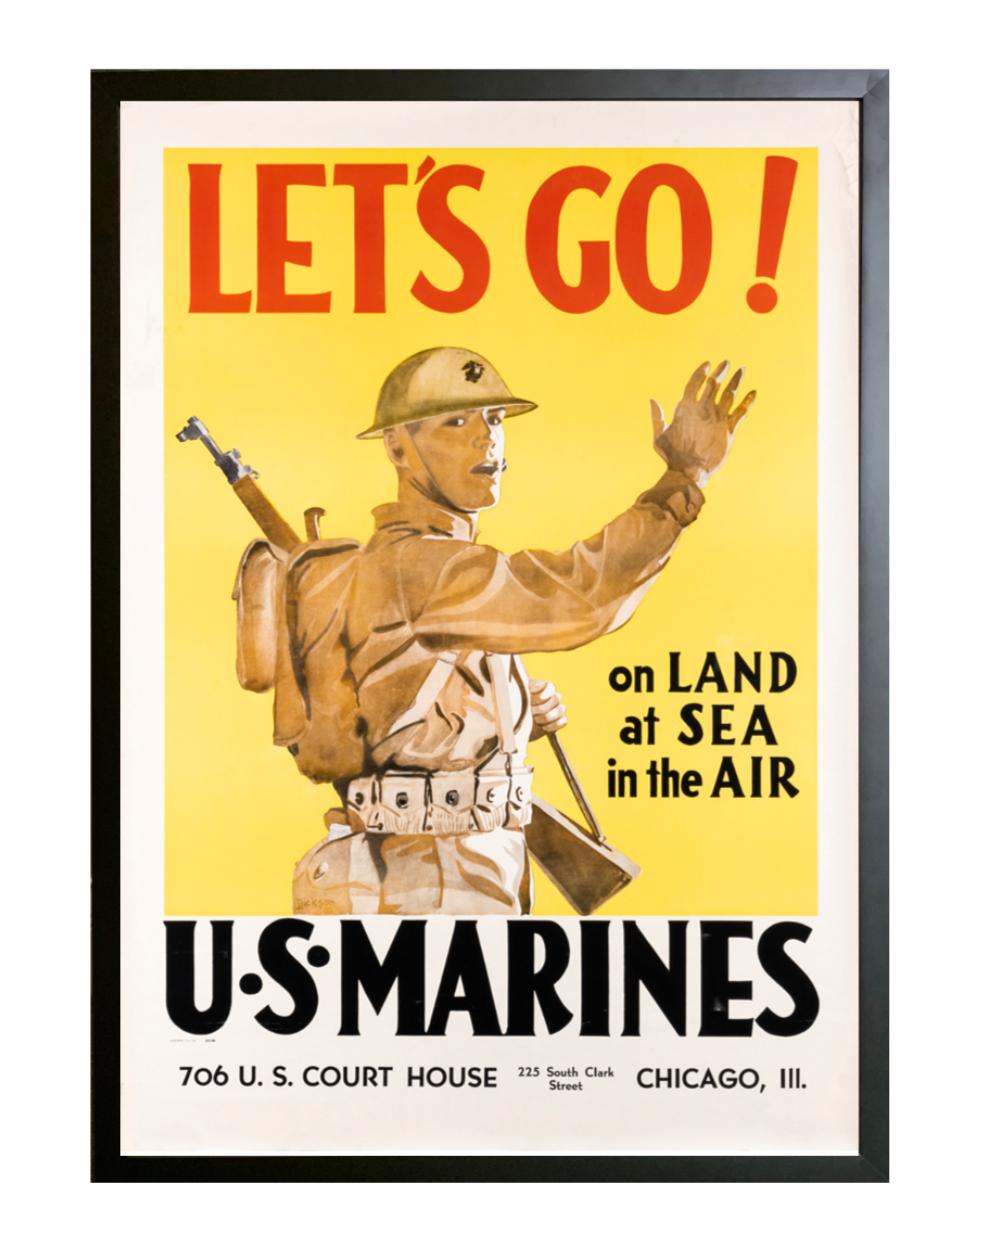 This is an original World War II Marines recruitment poster, by Dickson and issued in 1941. The poster depicts a uniformed Marine beckoning at the viewer to follow him. The persuasive text 